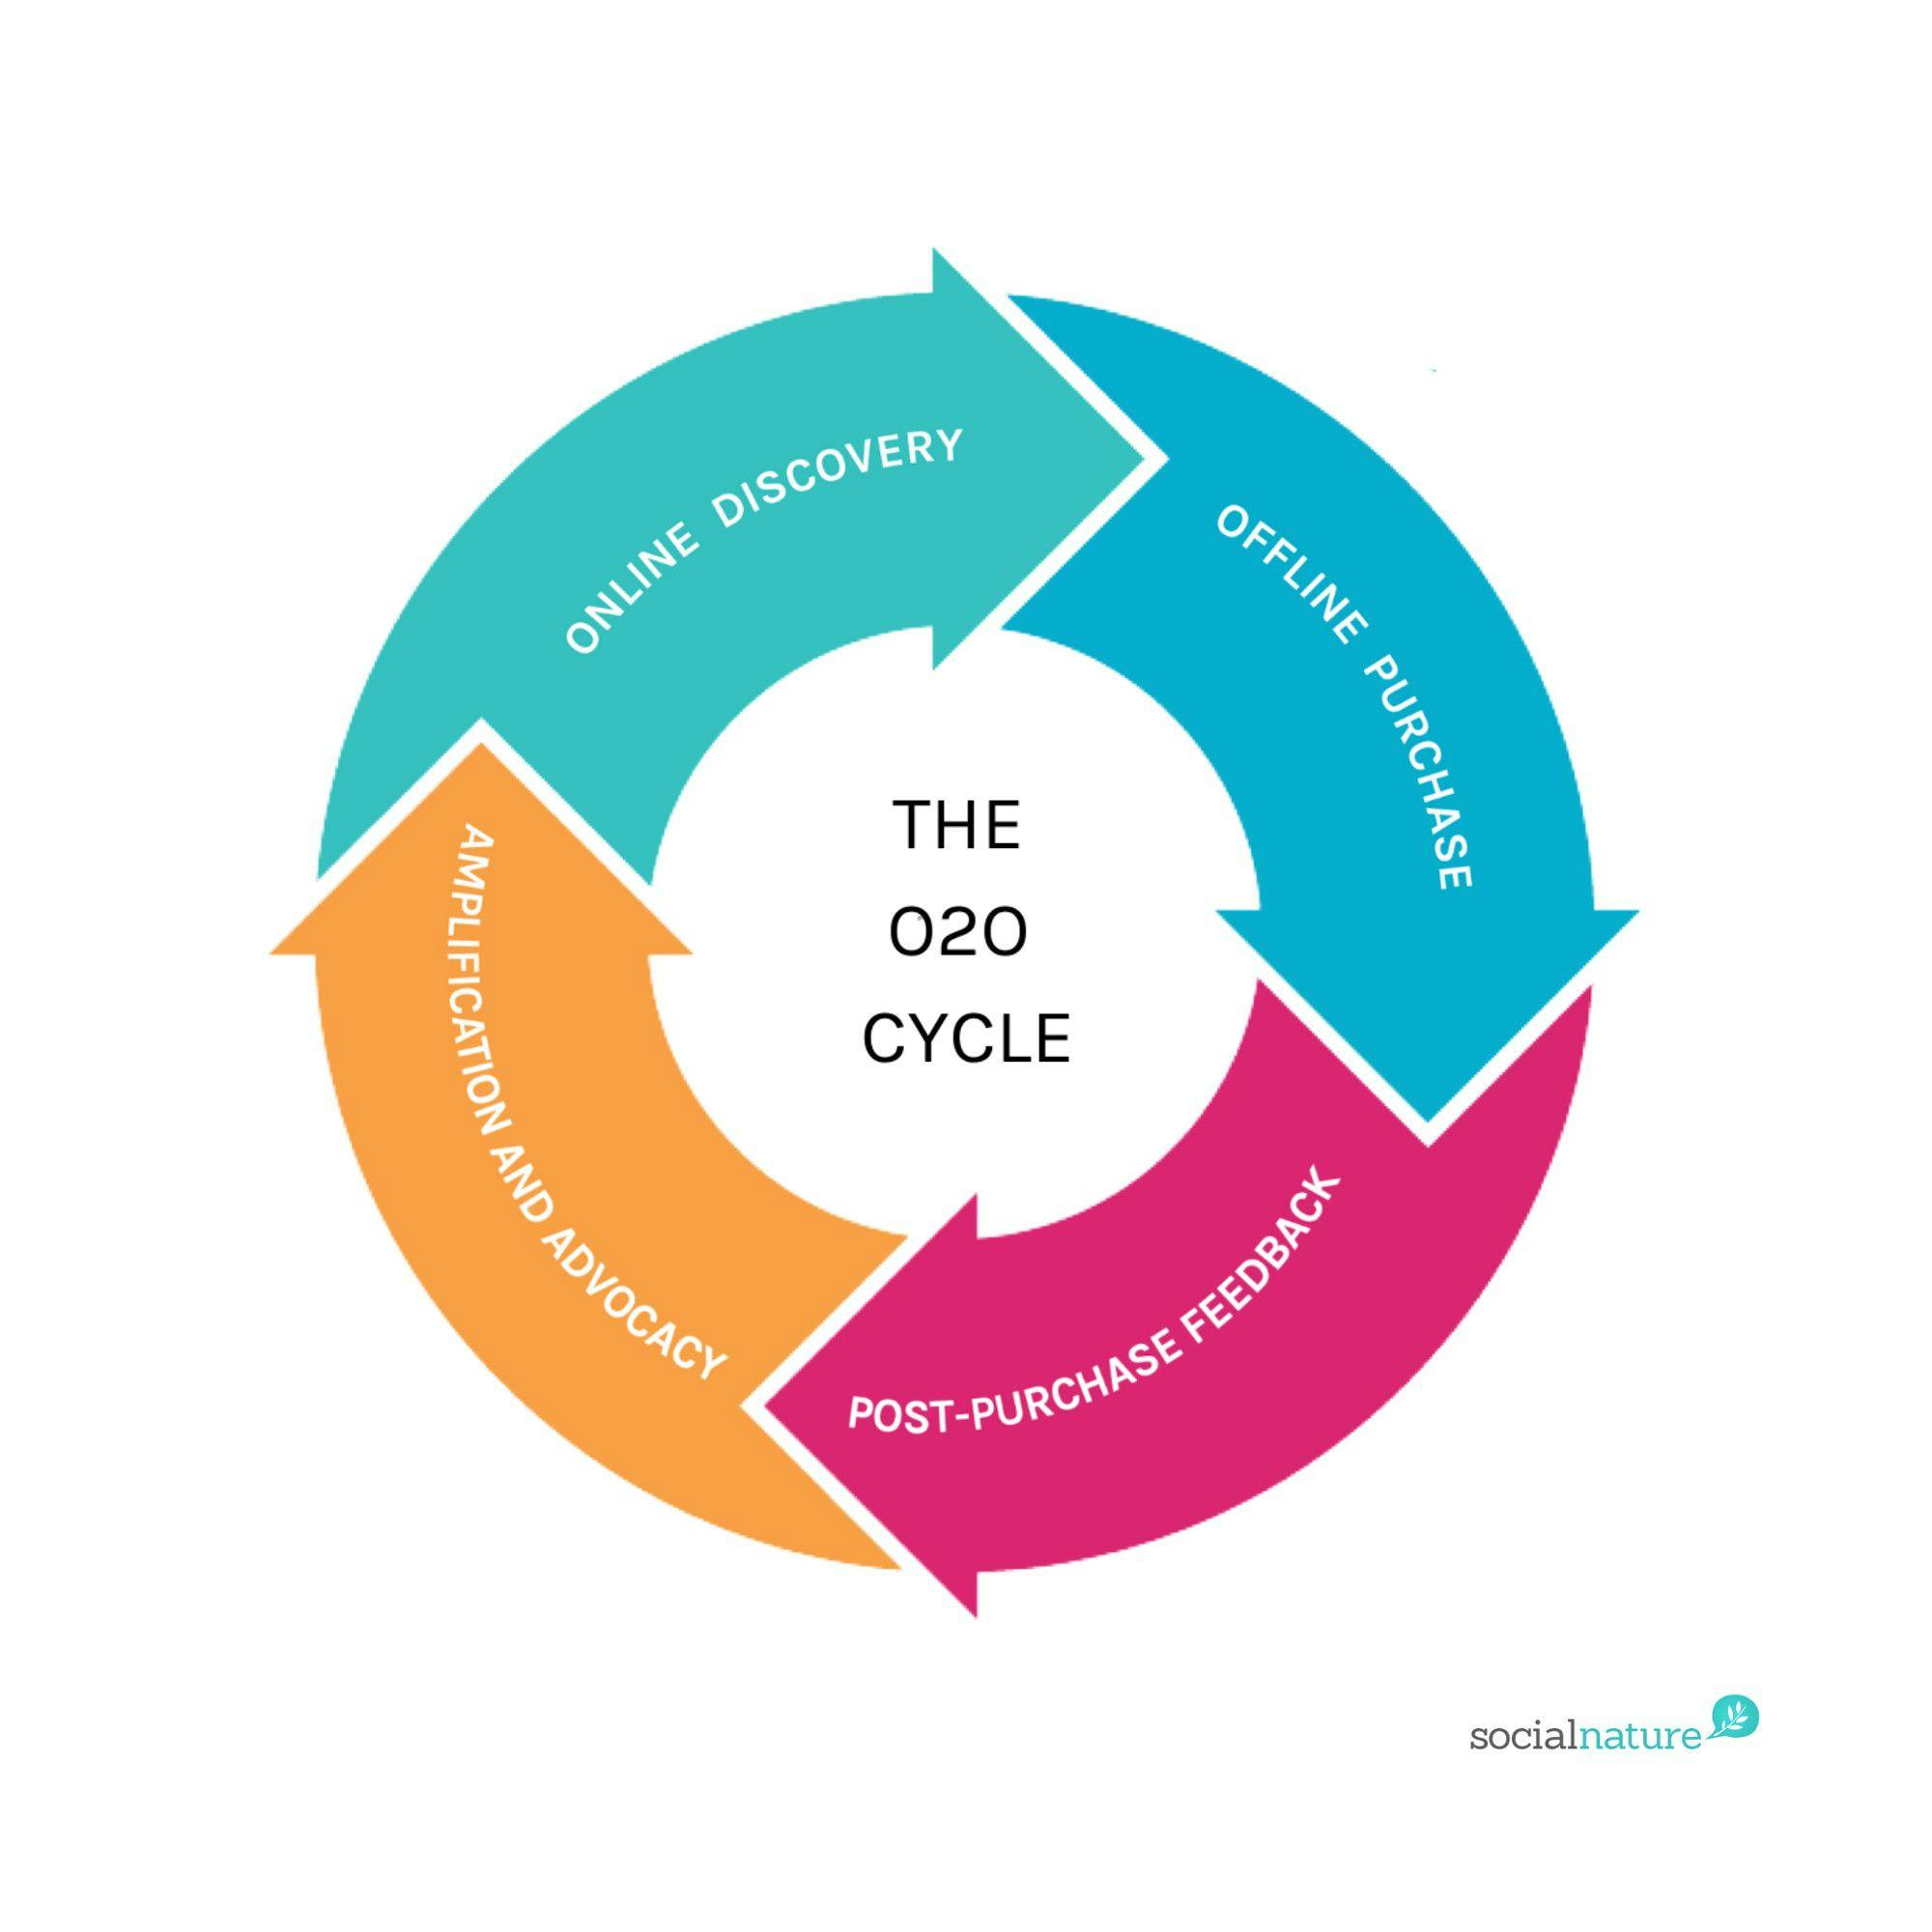 There are four stages of the Online-to-Offline marketing cycle. Photo from Social Nature